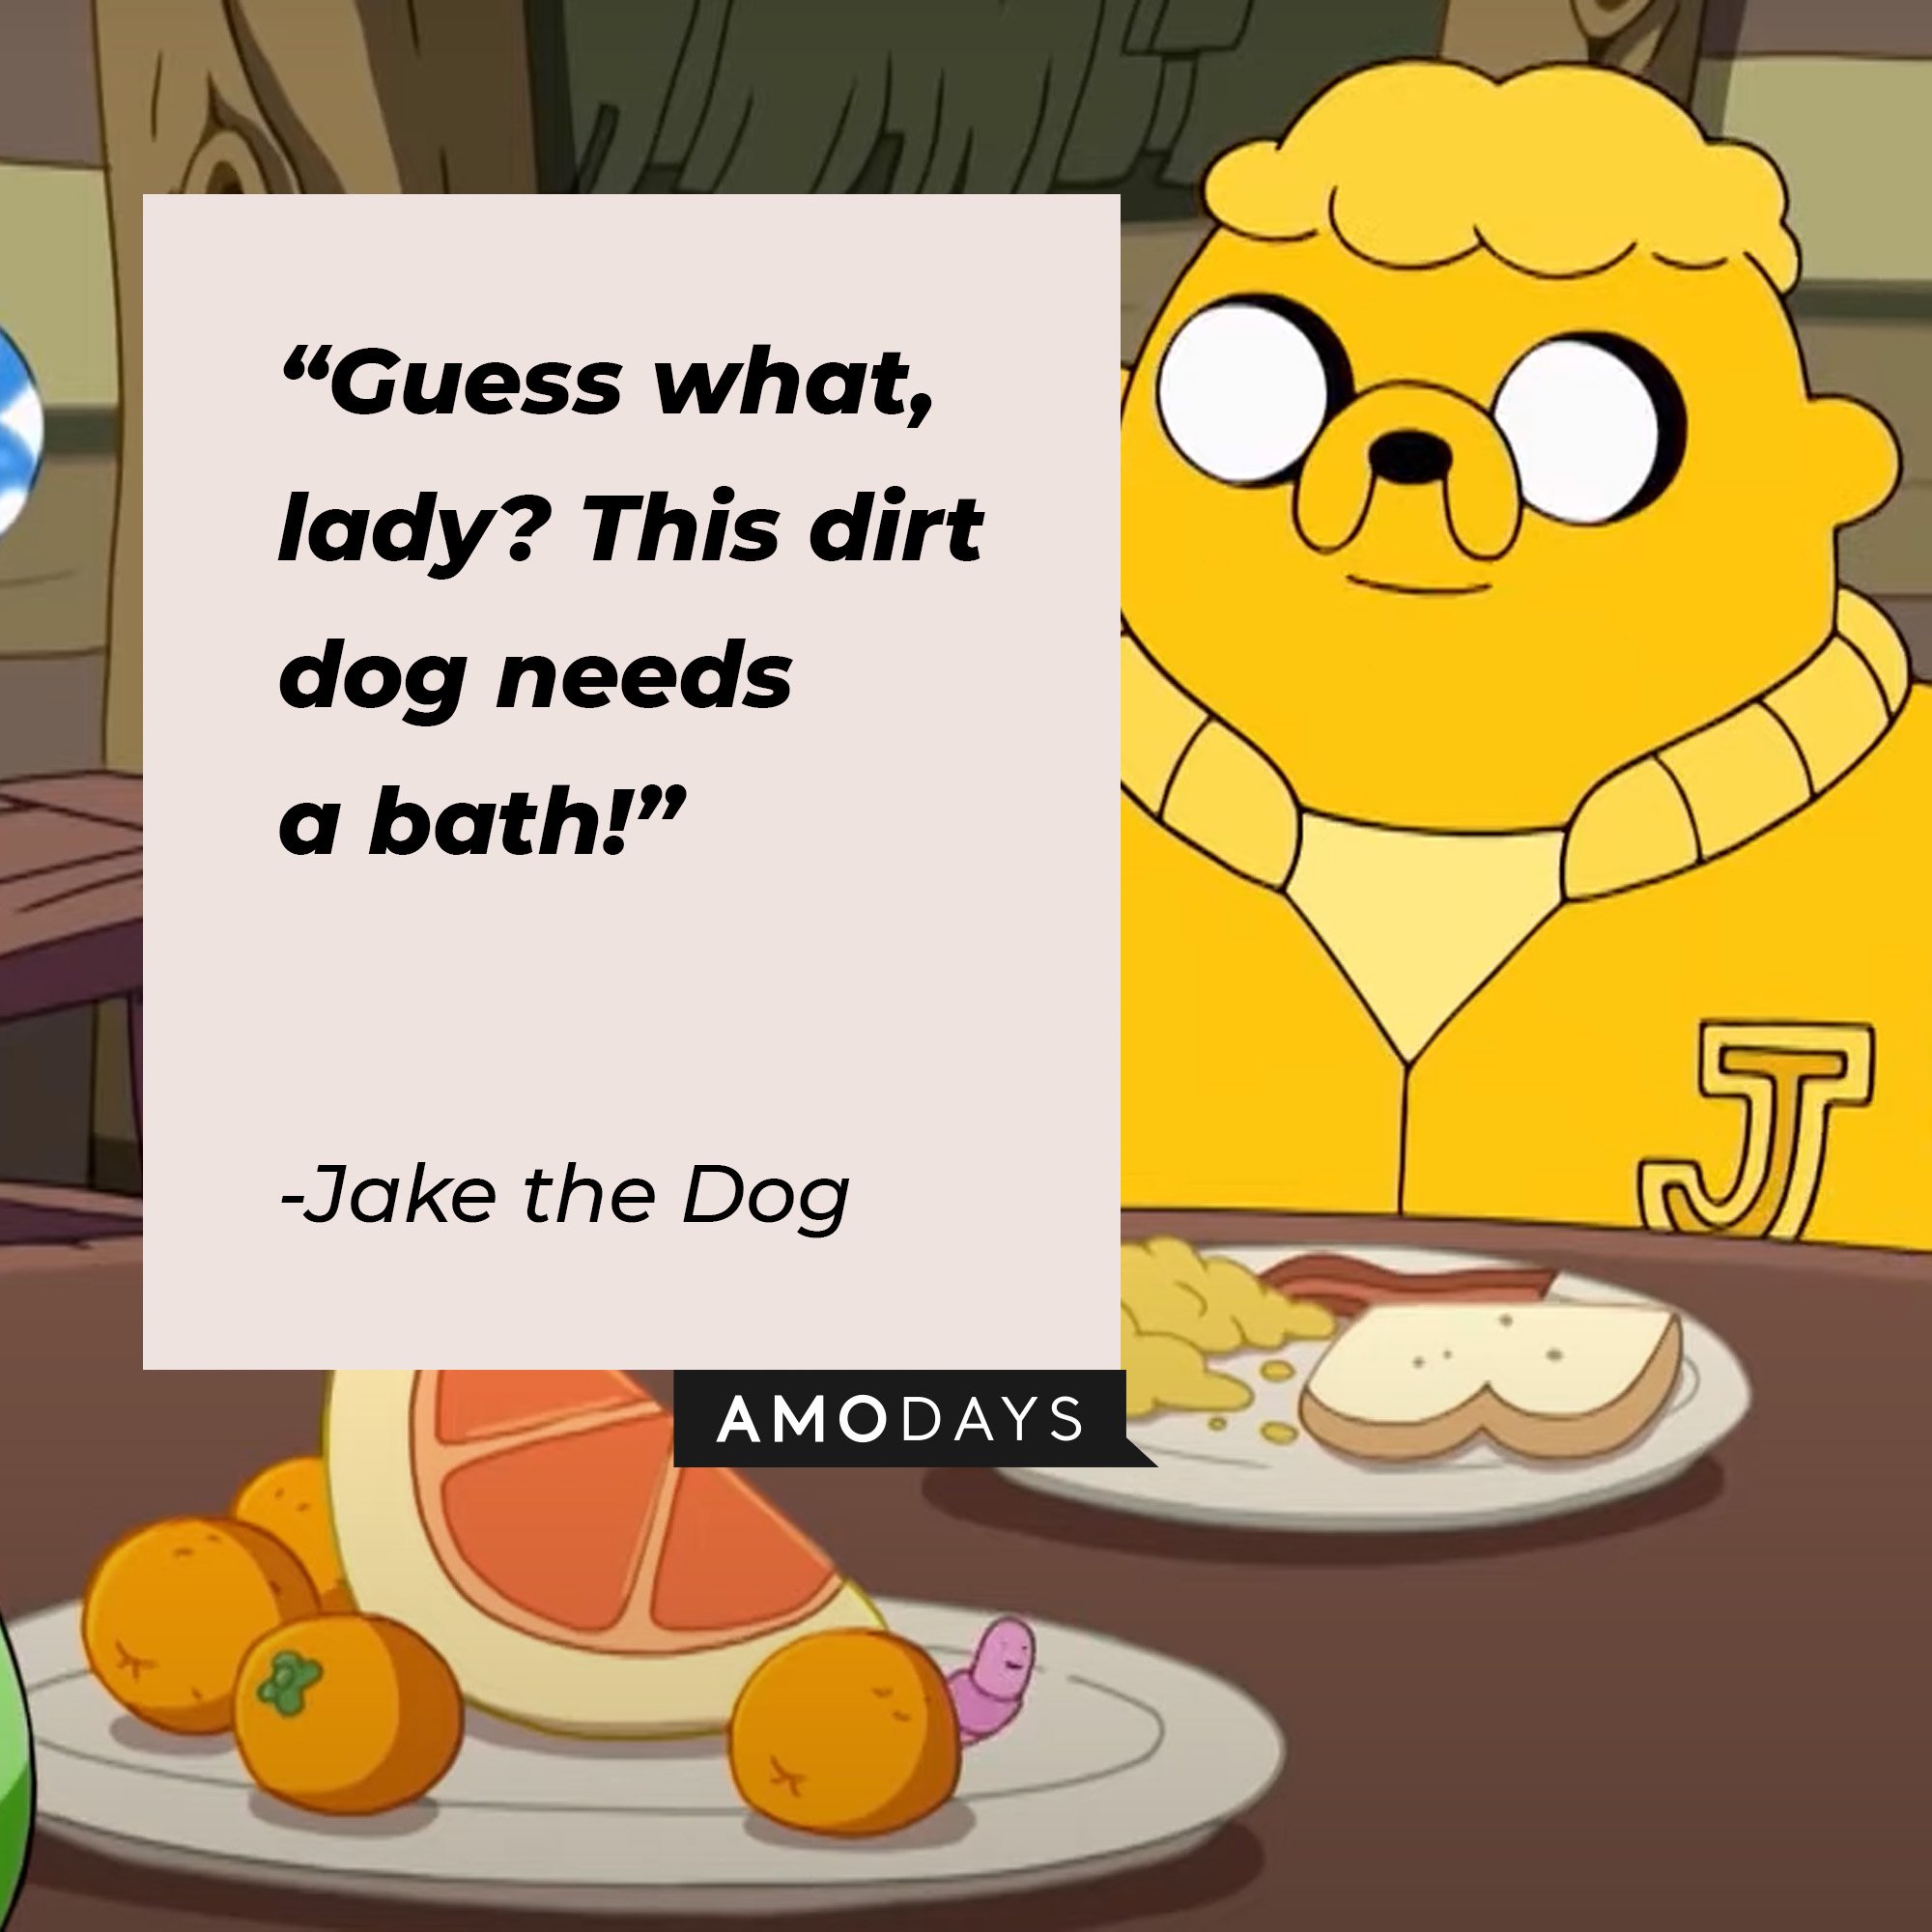 Jake the Dog's quote: “Guess what, lady? This dirt dog needs a bath!” | Image: AmoDays